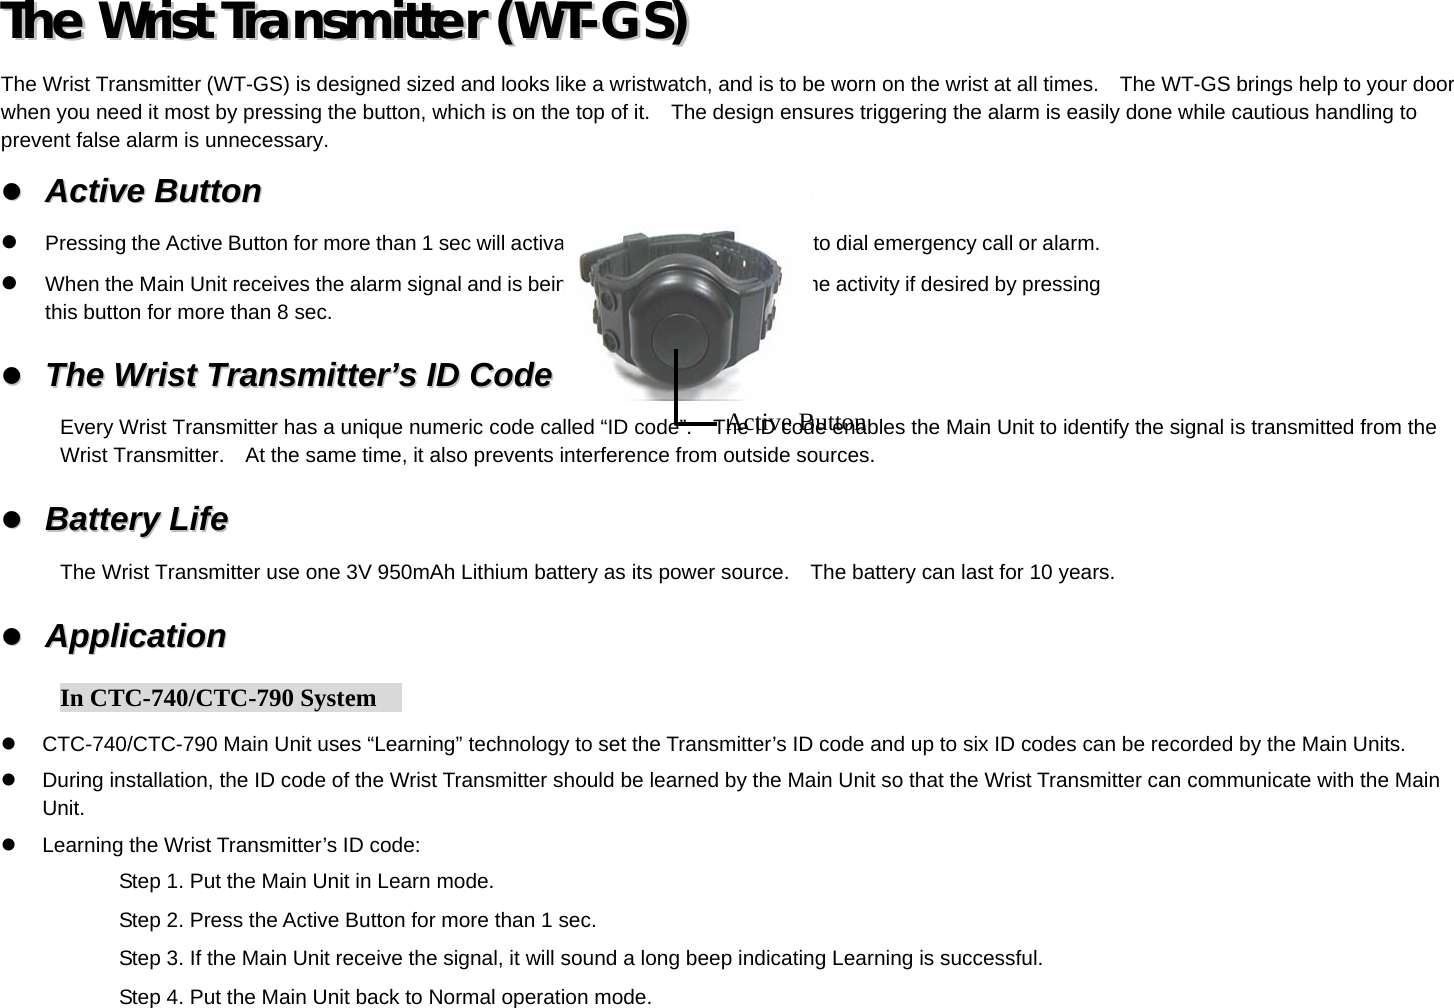 TThhee  WWrriisstt  TTrraannssmmiitttteerr  ((WWTT--GGSS))    The Wrist Transmitter (WT-GS) is designed sized and looks like a wristwatch, and is to be worn on the wrist at all times.    The WT-GS brings help to your door when you need it most by pressing the button, which is on the top of it.    The design ensures triggering the alarm is easily done while cautious handling to prevent false alarm is unnecessary.   AAccttiivvee  BBuuttttoonn    Pressing the Active Button for more than 1 sec will activate the Main Unit, causing it to dial emergency call or alarm.   When the Main Unit receives the alarm signal and is being activated, you can stop the activity if desired by pressing this button for more than 8 sec.   TThhee  WWrriisstt  TTrraannssmmiitttteerr’’ss  IIDD  CCooddee  Every Wrist Transmitter has a unique numeric code called “ID code”.    The ID code enables the Main Unit to identify the signal is transmitted from the Wrist Transmitter.    At the same time, it also prevents interference from outside sources.   BBaatttteerryy  LLiiffee    The Wrist Transmitter use one 3V 950mAh Lithium battery as its power source.    The battery can last for 10 years.   AApppplliiccaattiioonn      In CTC-740/CTC-790 System       CTC-740/CTC-790 Main Unit uses “Learning” technology to set the Transmitter’s ID code and up to six ID codes can be recorded by the Main Units.   During installation, the ID code of the Wrist Transmitter should be learned by the Main Unit so that the Wrist Transmitter can communicate with the Main Unit.   Learning the Wrist Transmitter’s ID code: Step 1. Put the Main Unit in Learn mode. Step 2. Press the Active Button for more than 1 sec. Step 3. If the Main Unit receive the signal, it will sound a long beep indicating Learning is successful. Step 4. Put the Main Unit back to Normal operation mode. Active Button 